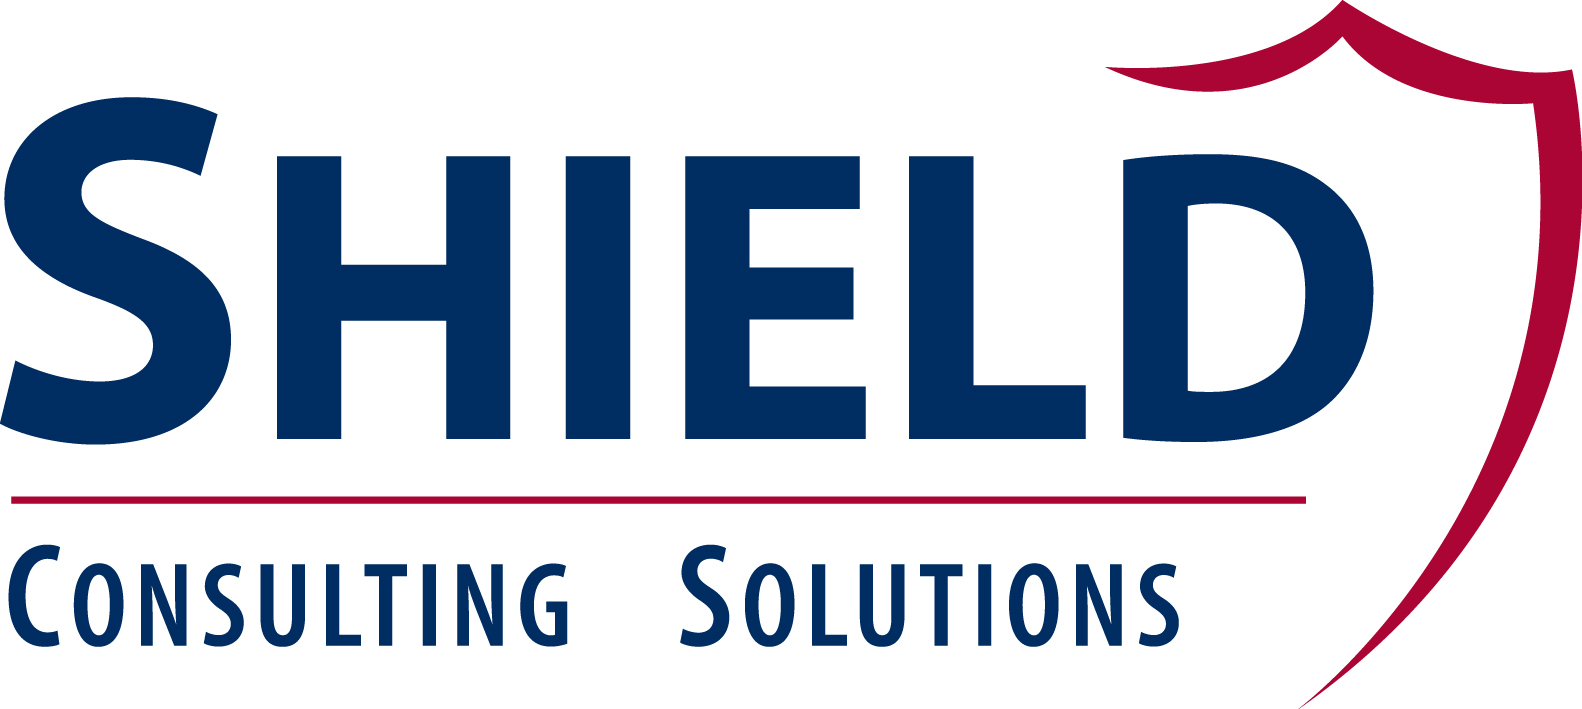 Shield Consulting Solutions logo